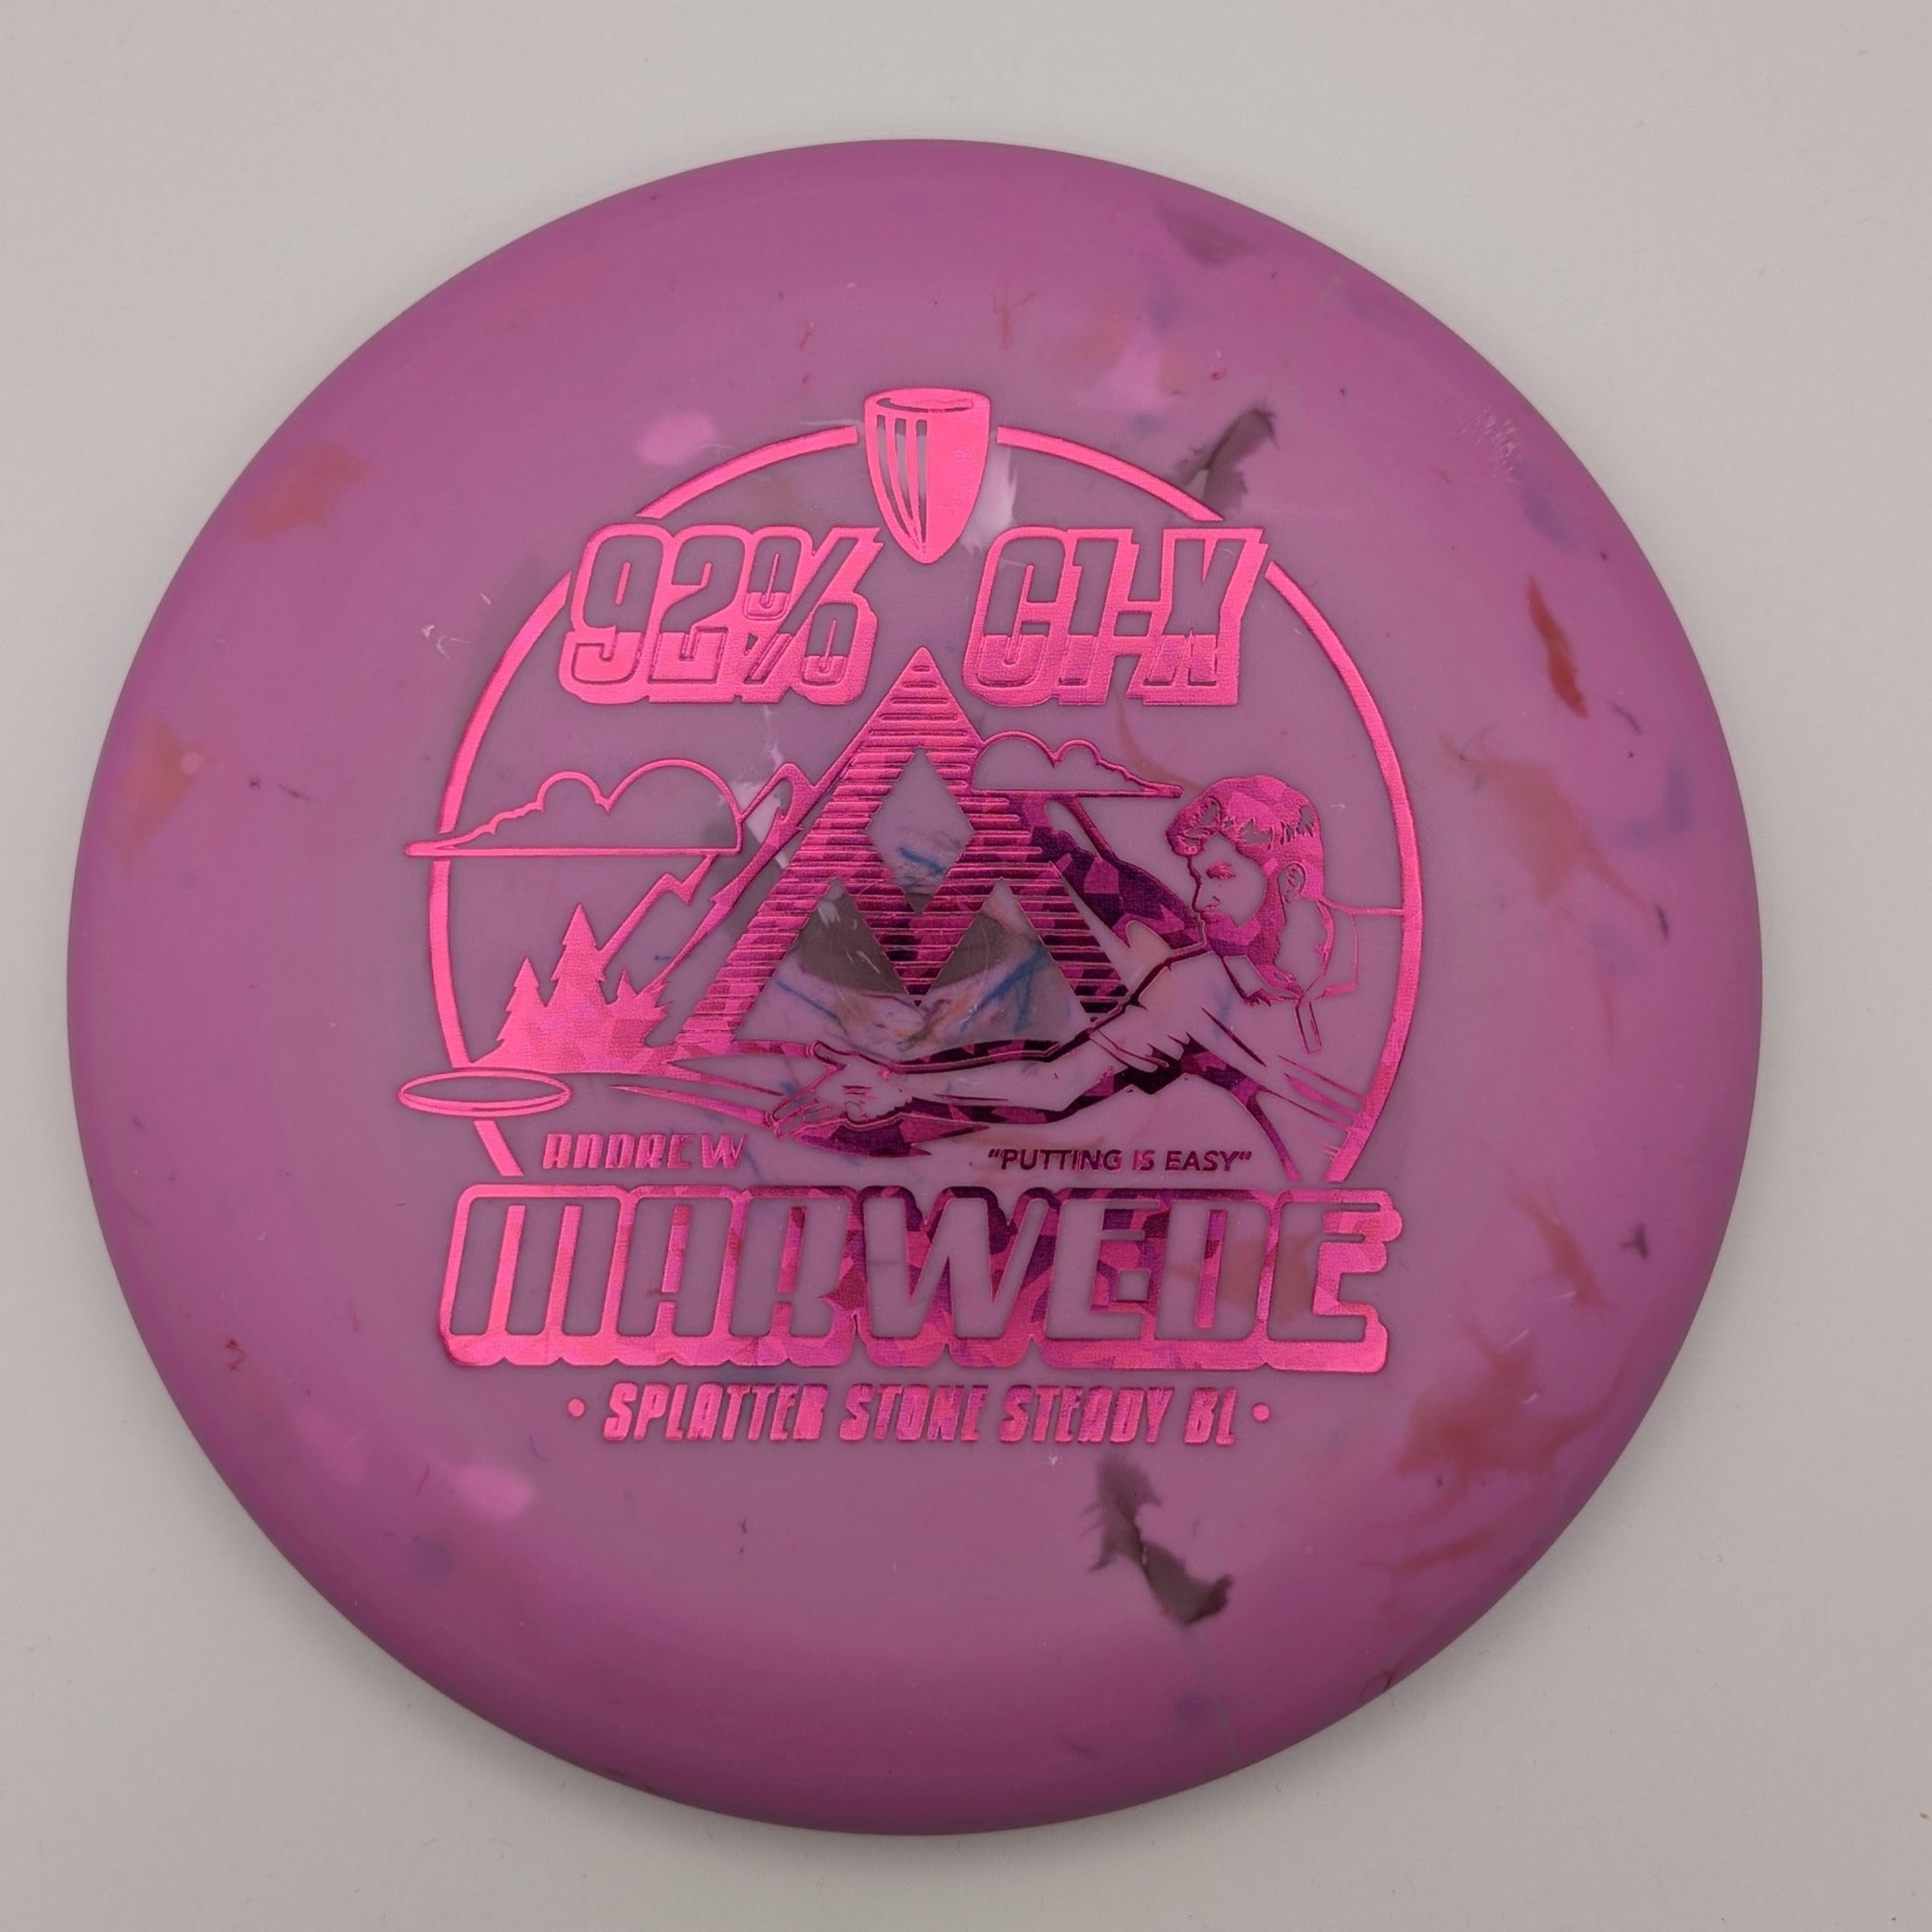 DGA Putt & Approach Steady BL Andrew Marwede Splatter Stone